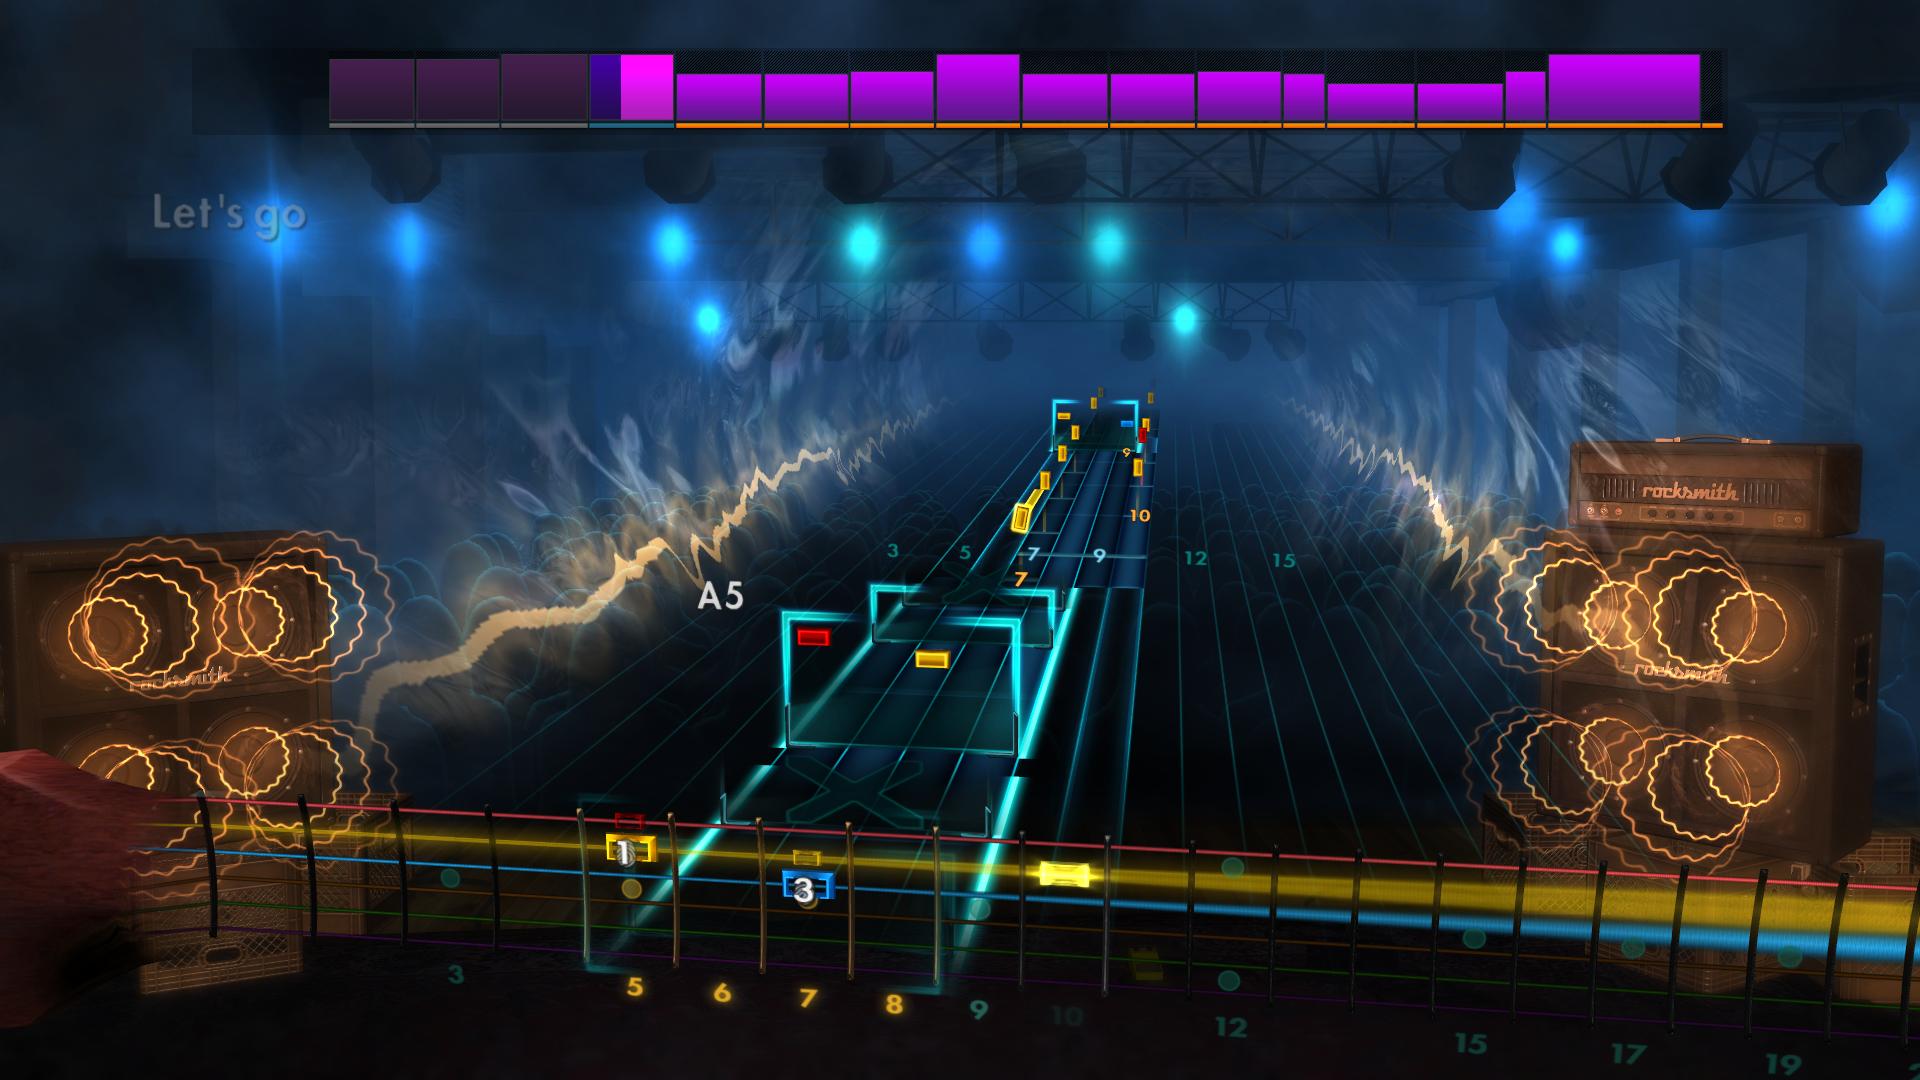 Rocksmith® 2014 Edition – Remastered – NOFX - “Seeing Double at the Triple Rock” Featured Screenshot #1